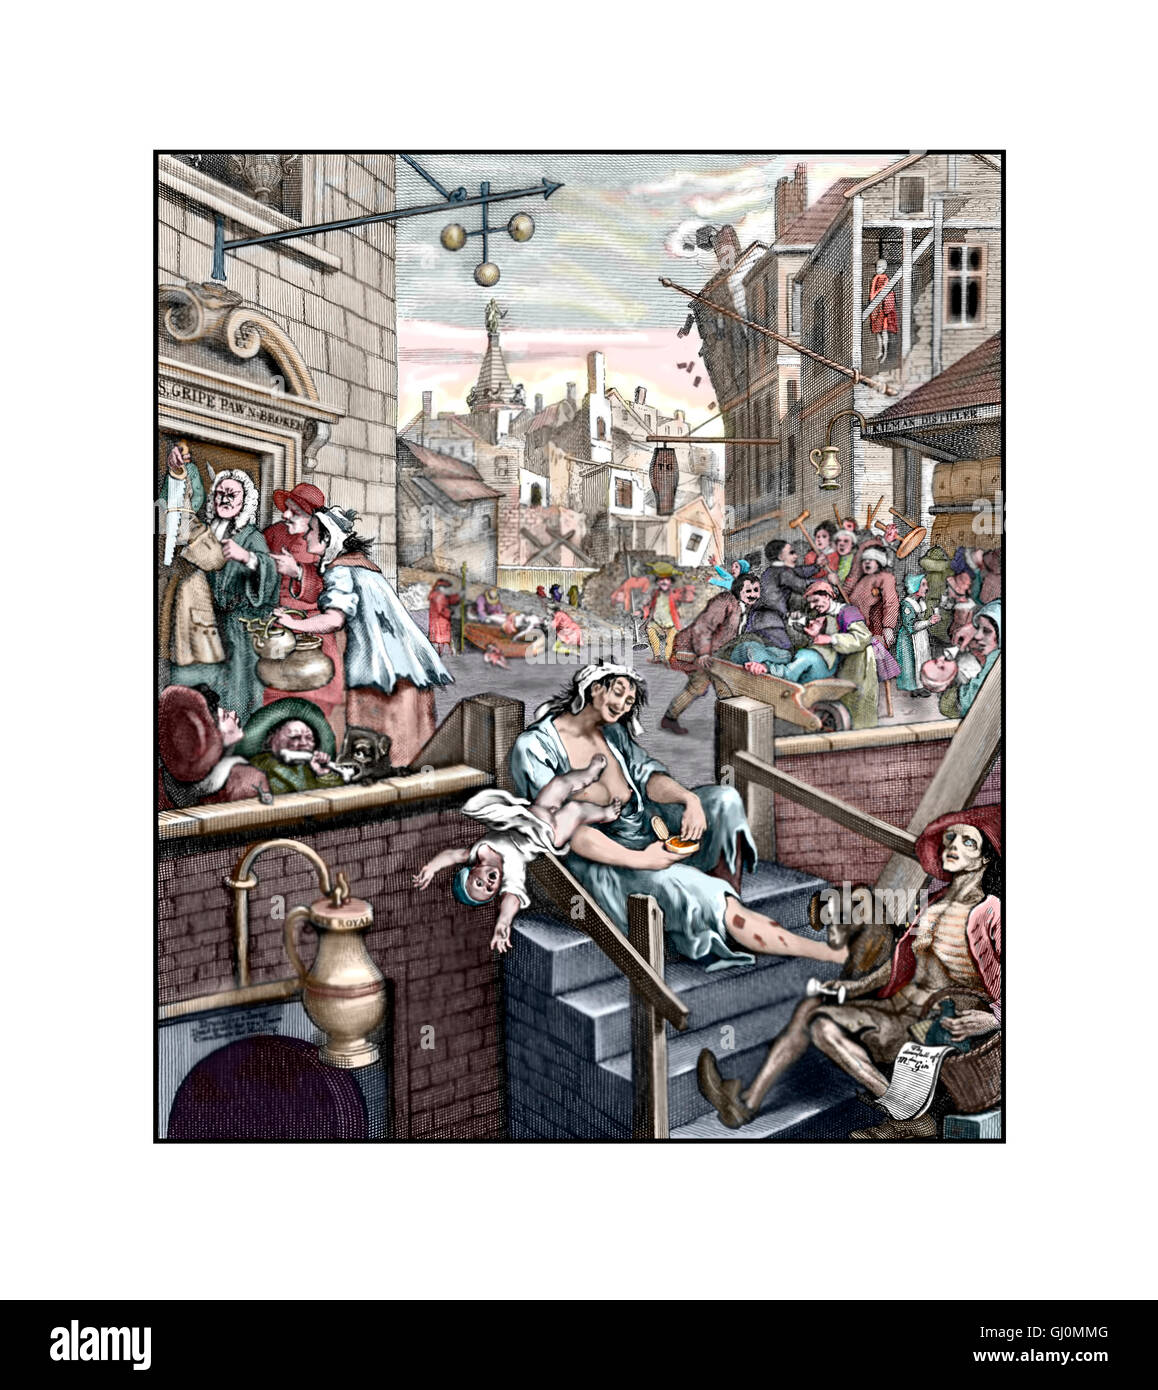 Gin Lane, Illustration from the 1751 engraving by William Hogarth, sharpened and coloured Stock Photo